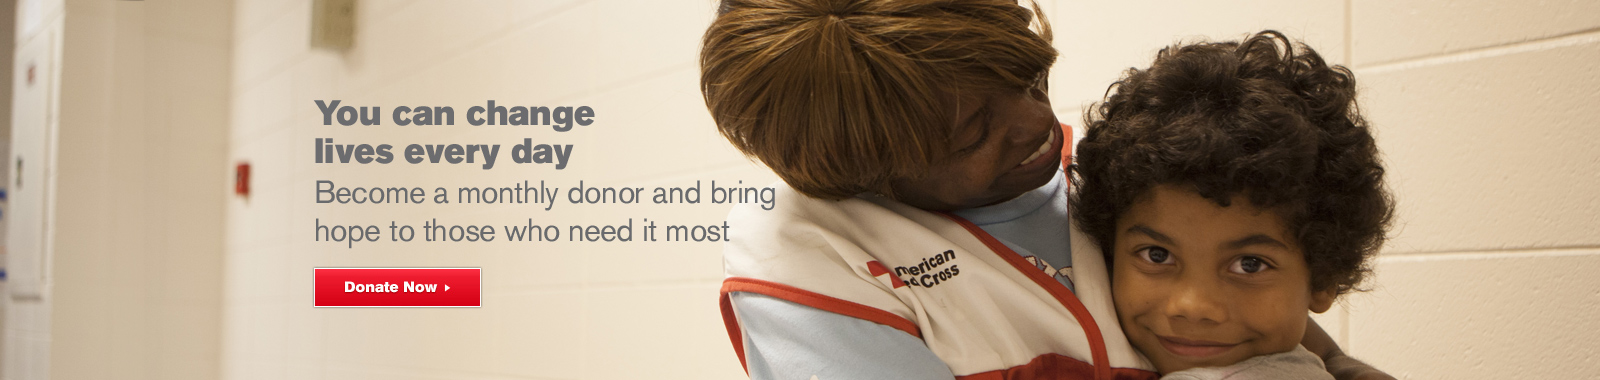 You can change lives every day. Become a monthly donor.